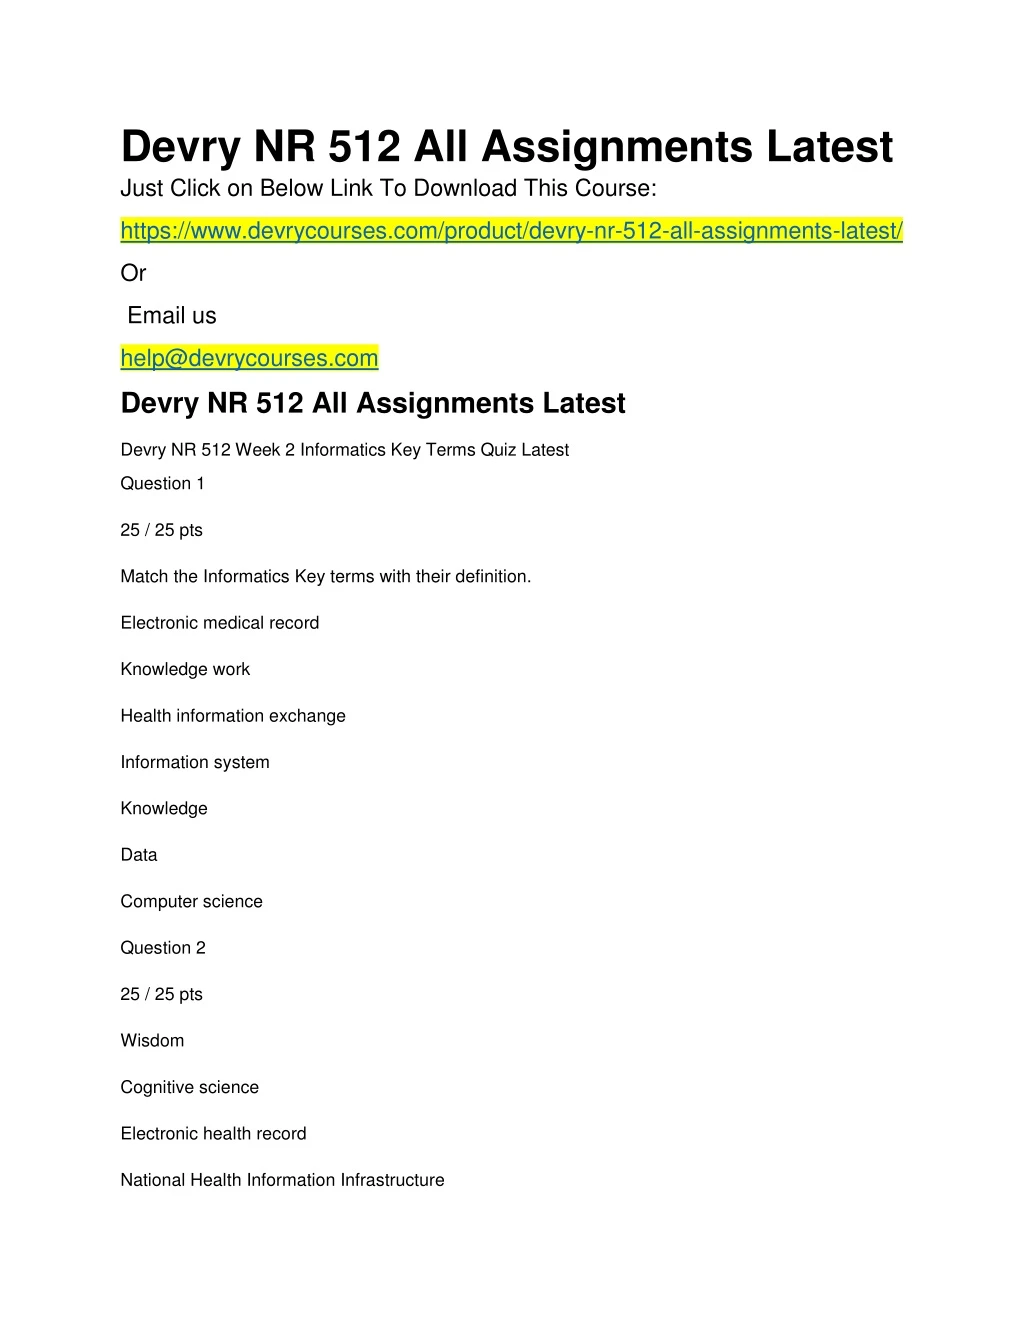 devry nr 512 all assignments latest just click